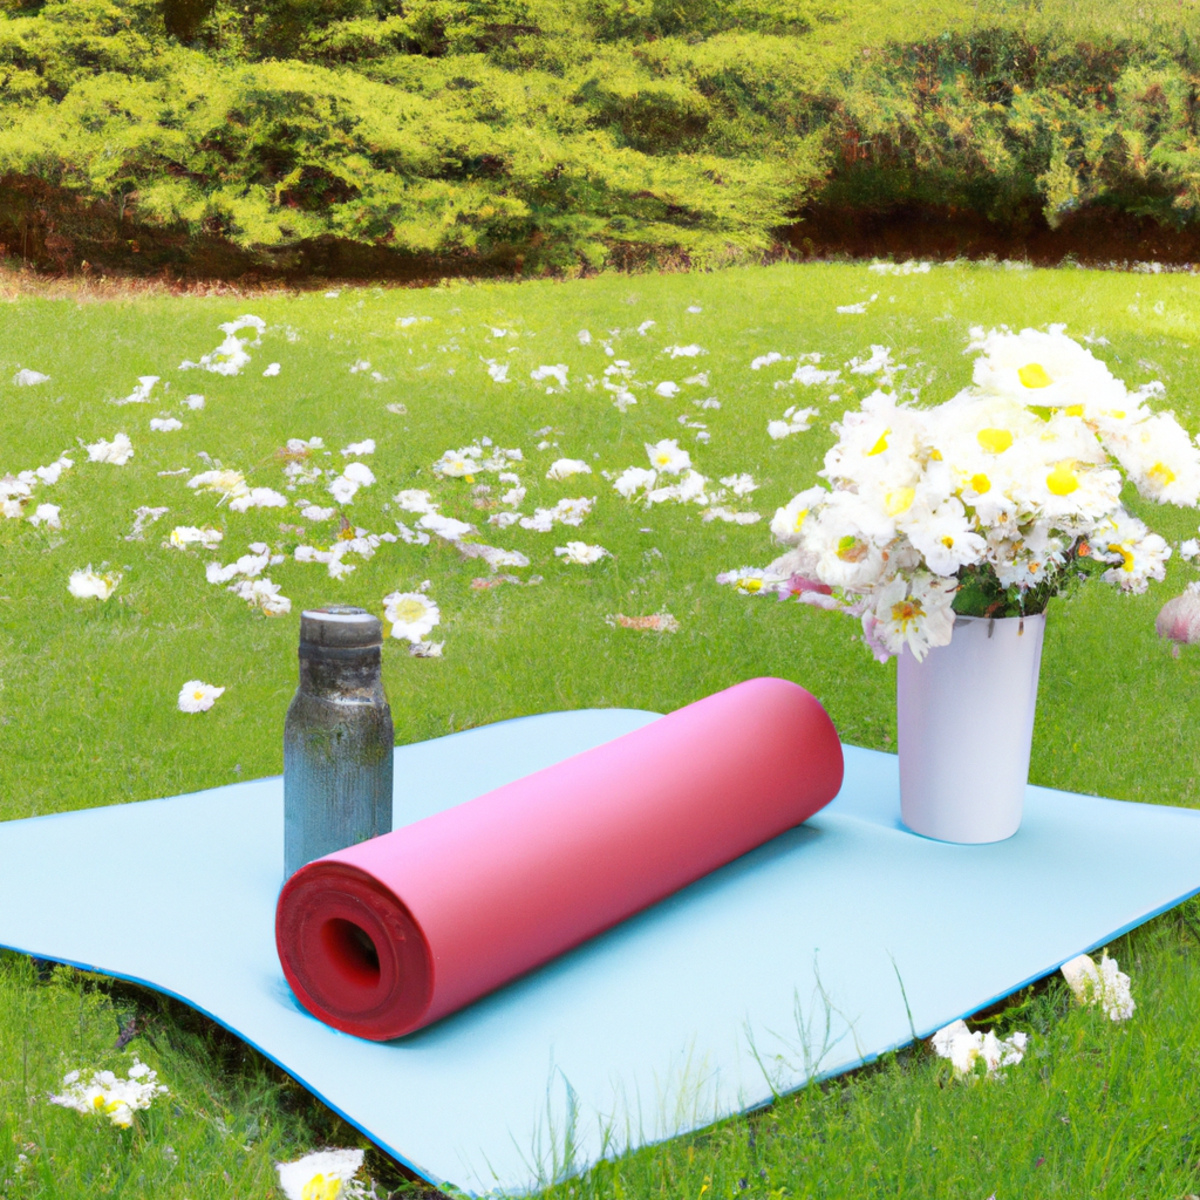 A serene yoga mat on green grass, surrounded by trees and flowers. Towel, water bottle, and books nearby. Calm and inviting -Healthy ways to manage stress